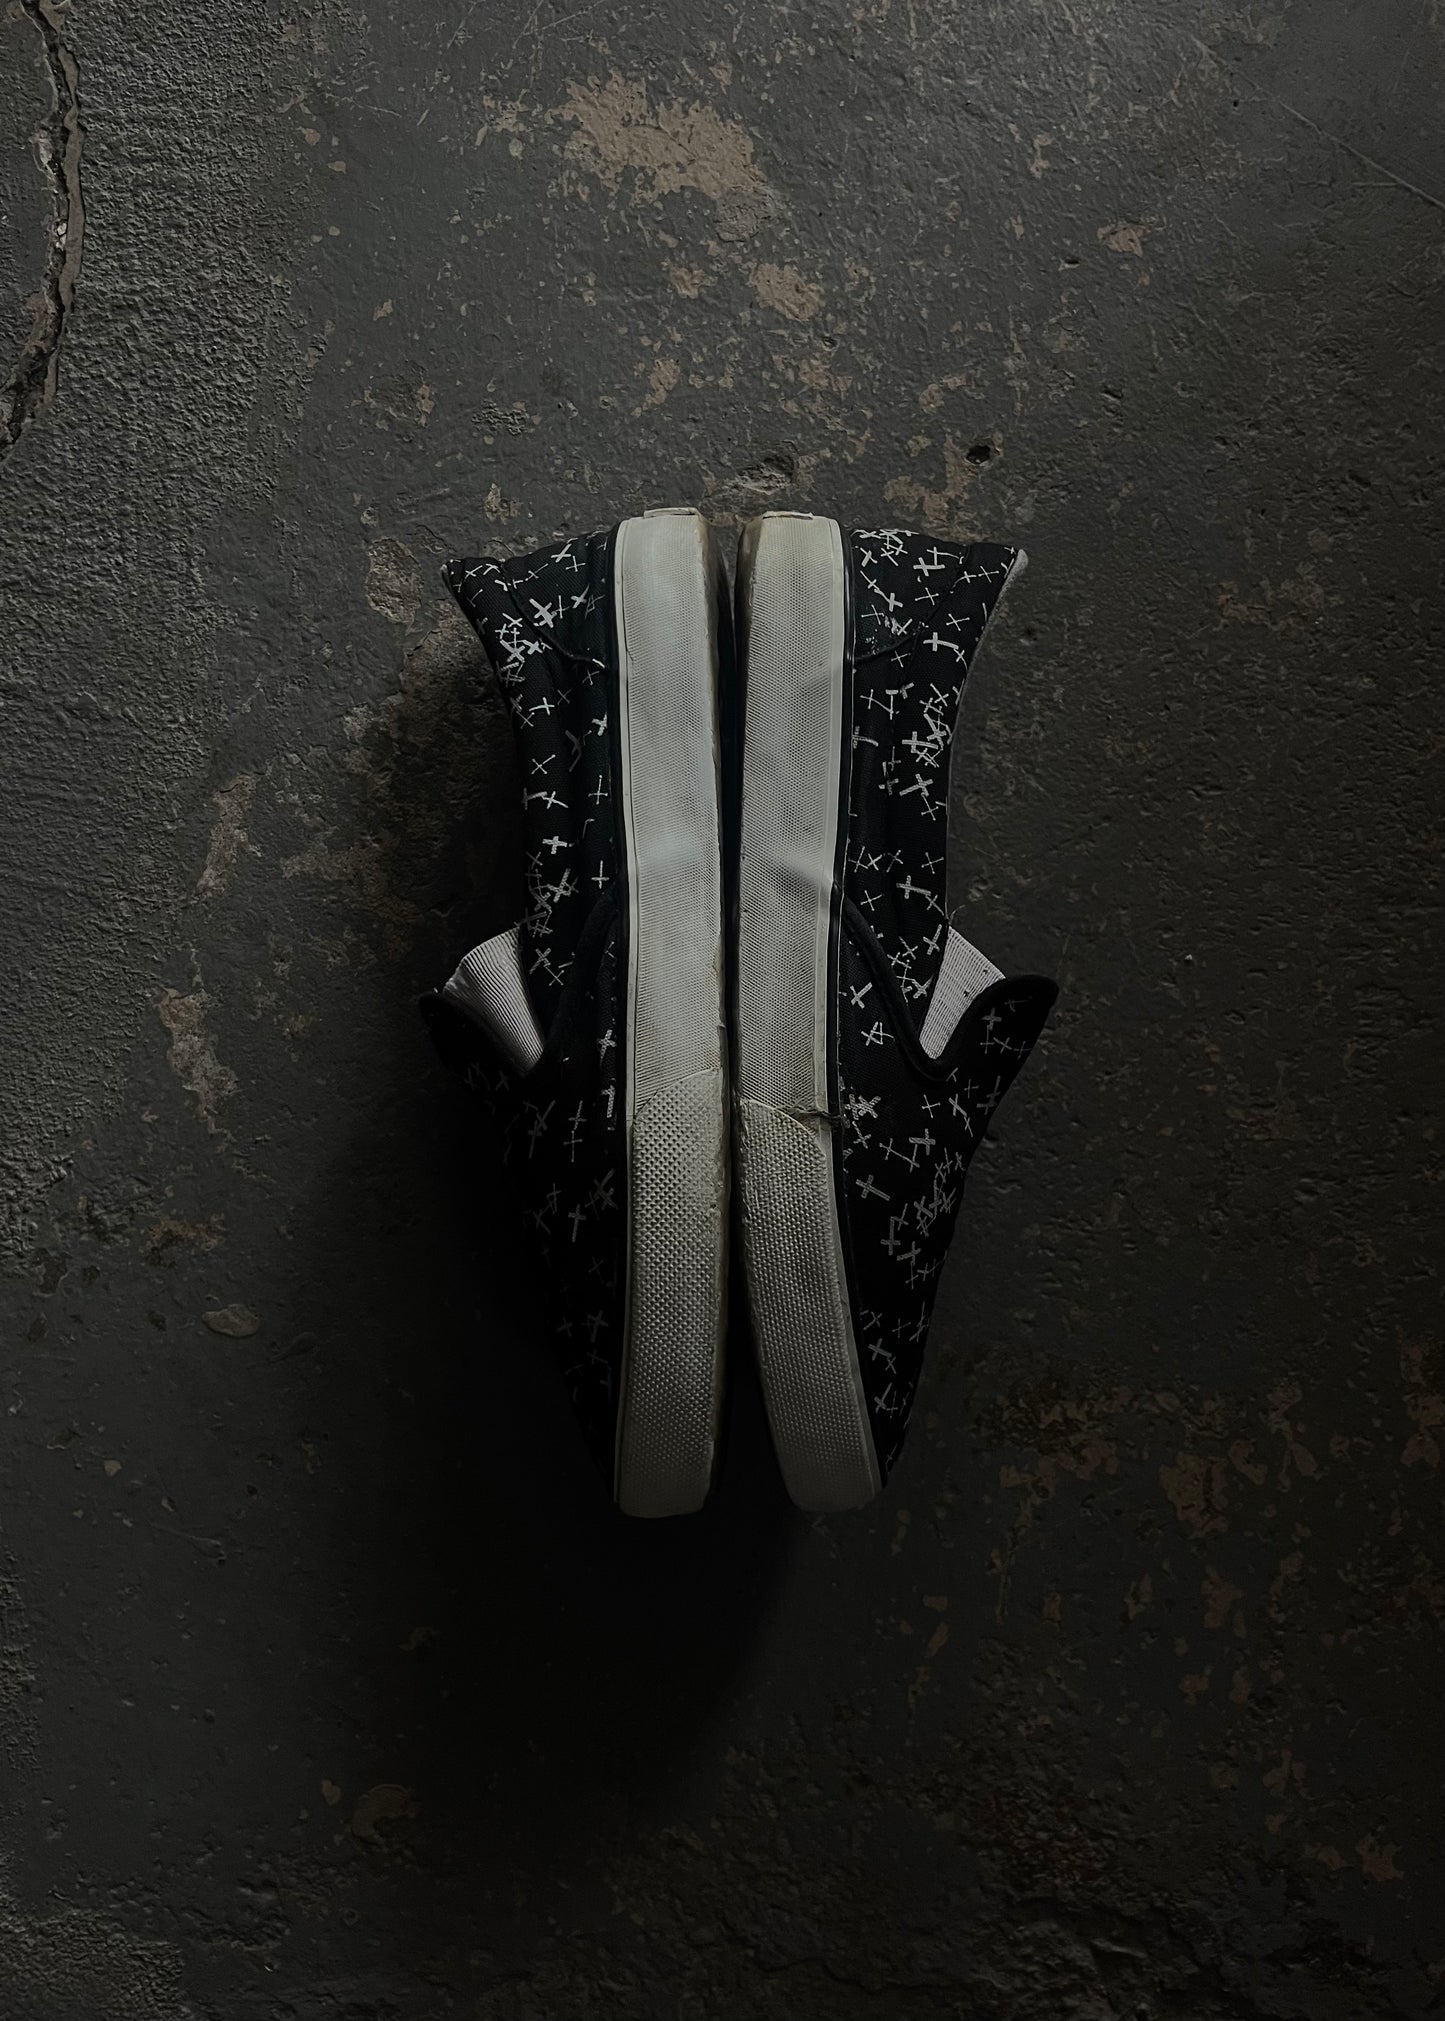 Undercover AW02 “Witches Cell Division” Cross Slip-on’s